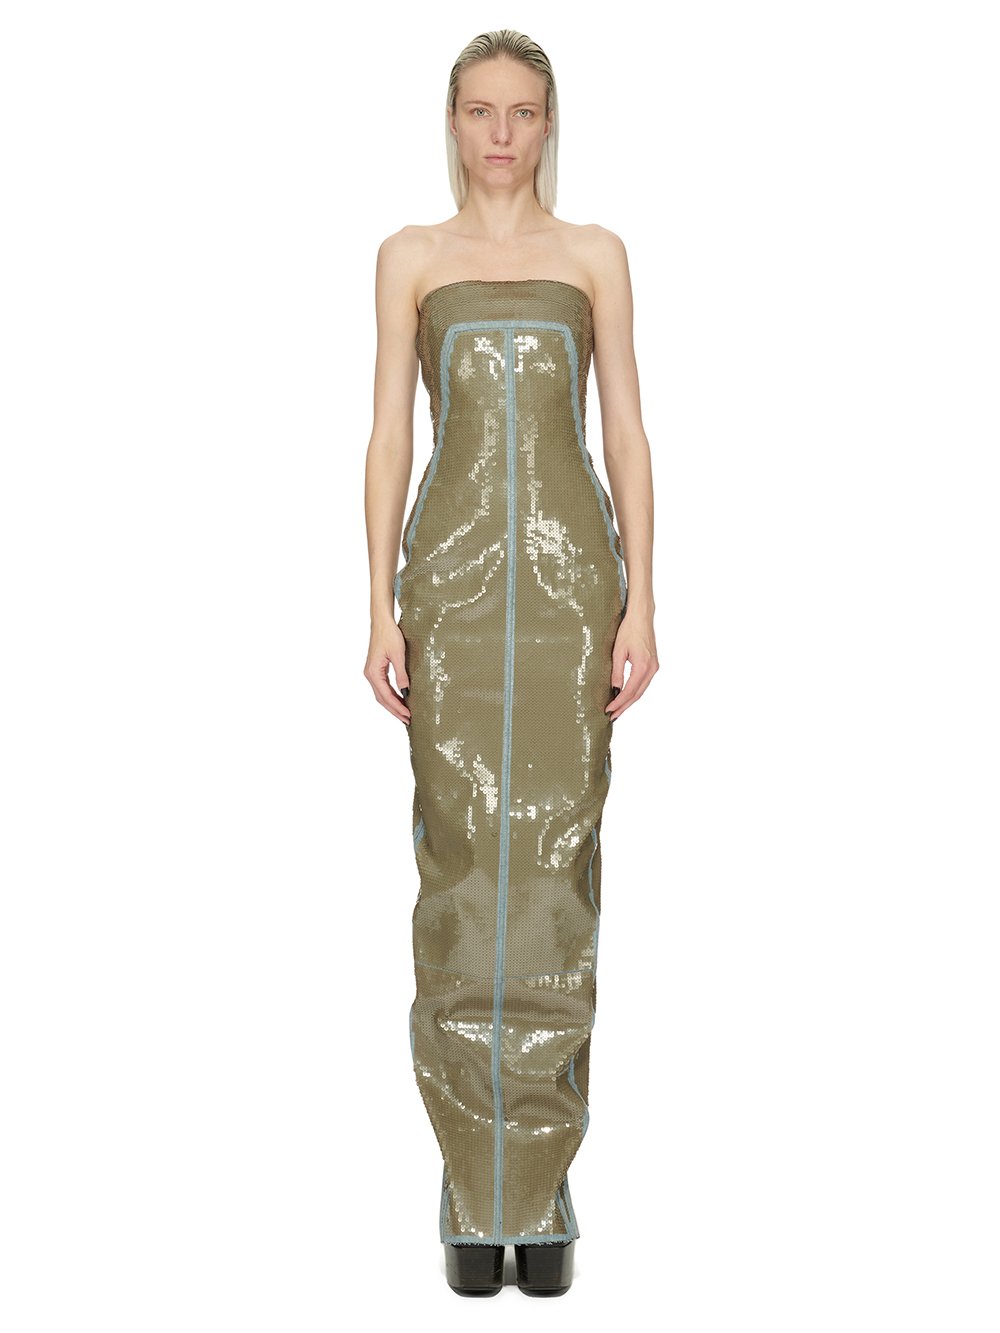 RICK OWENS FW23 LUXOR BUSTIER GOWN IN BLUE AND DUST SEQUIN EMBROIDERED STRETCH DENIM